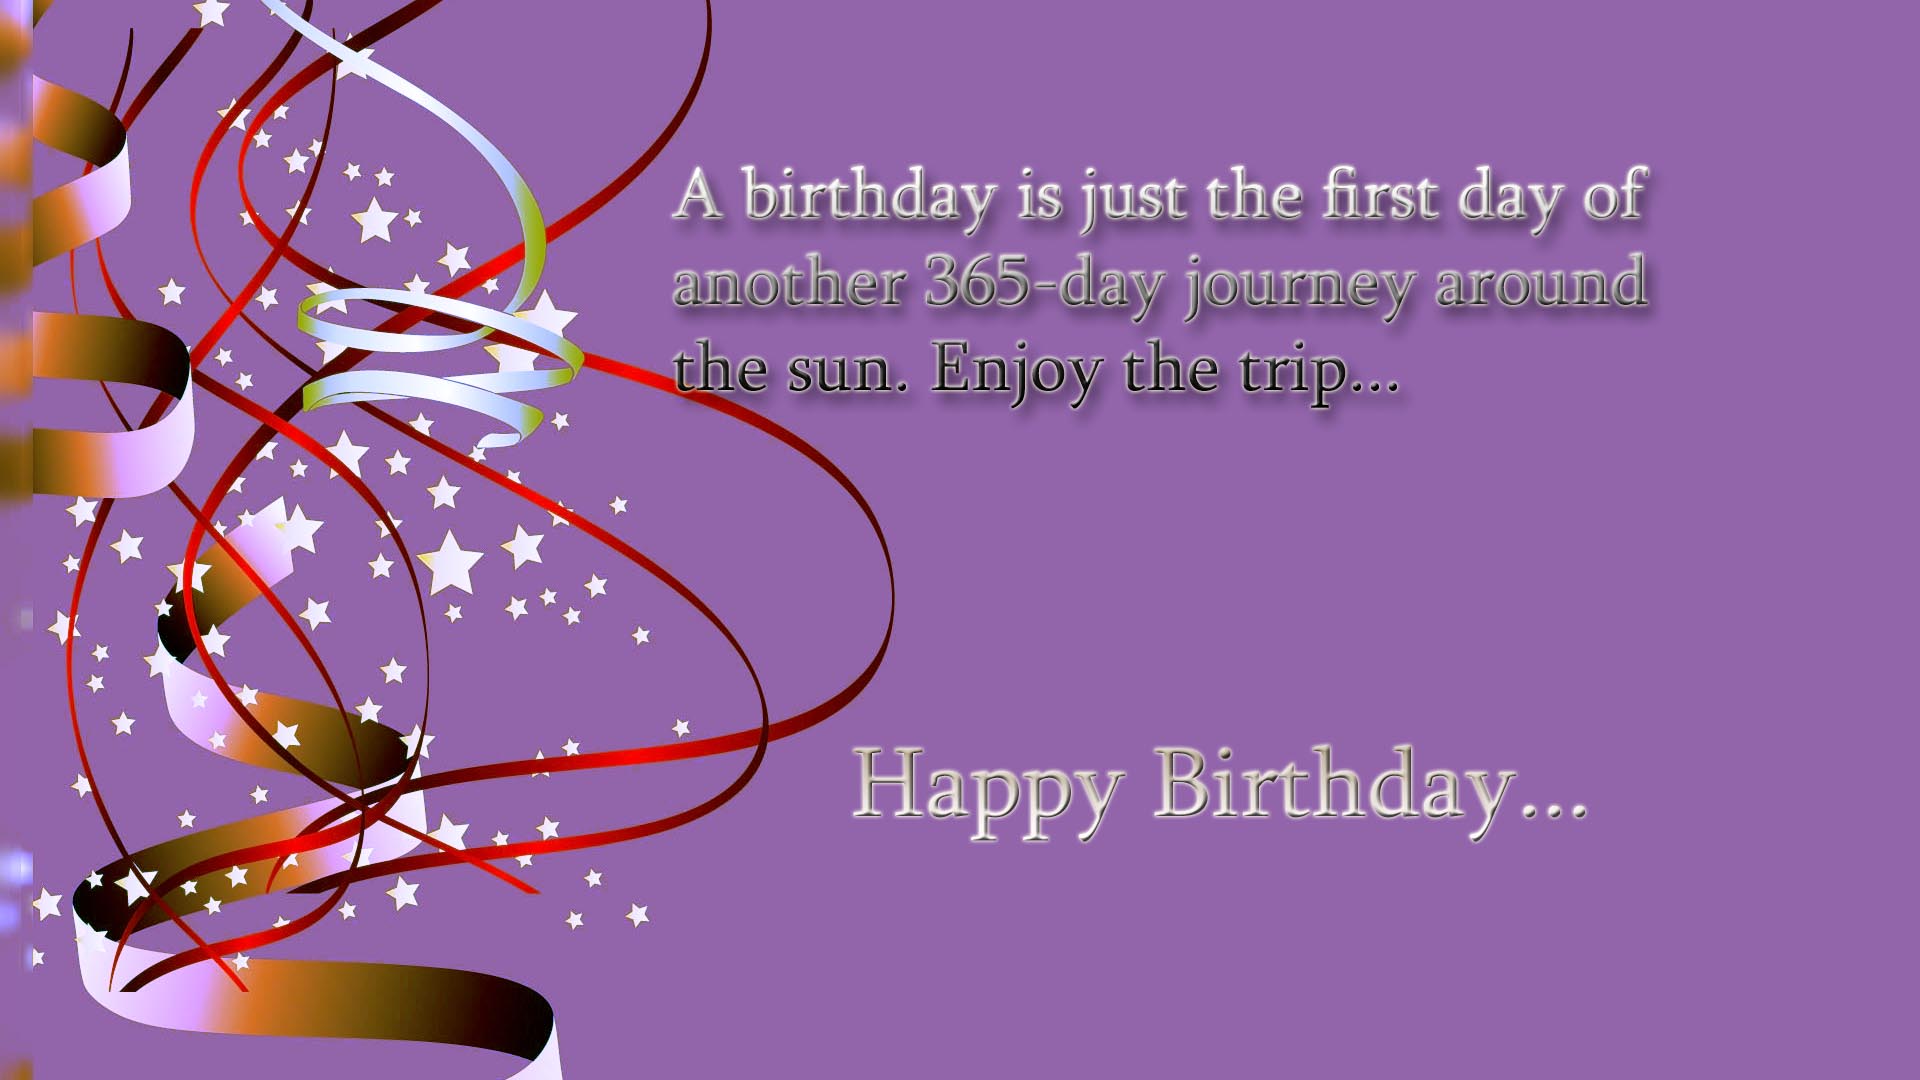 Birthday Wishes Background Wallpaper - Happy Birthday Quotes Hd - 1920x1080  Wallpaper 